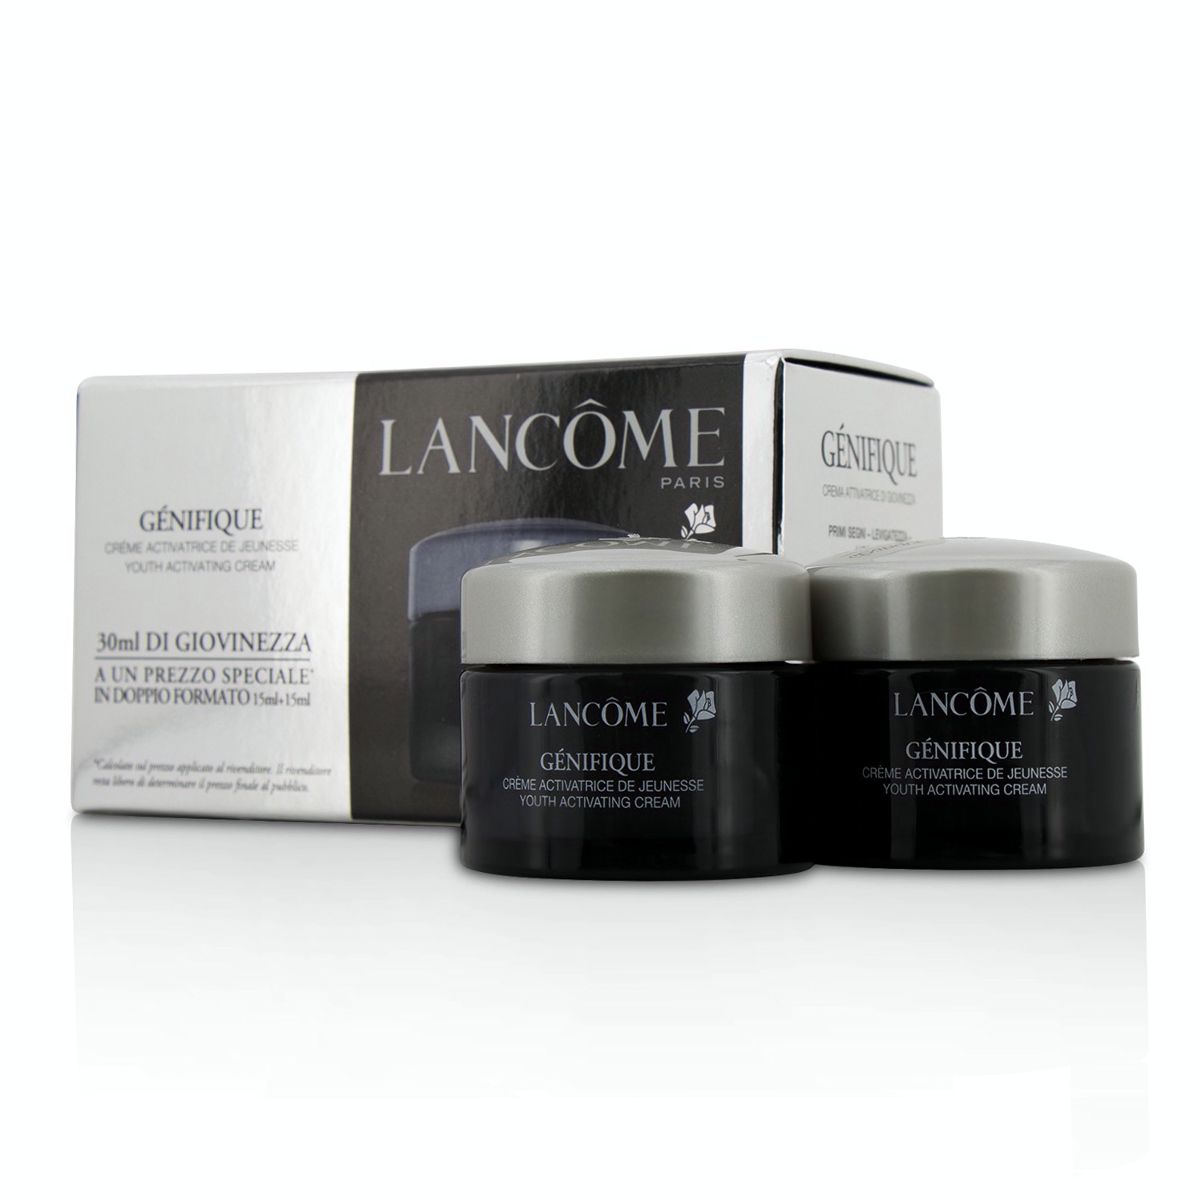 Genifique Youth Activating Cream Duo Lancome Image